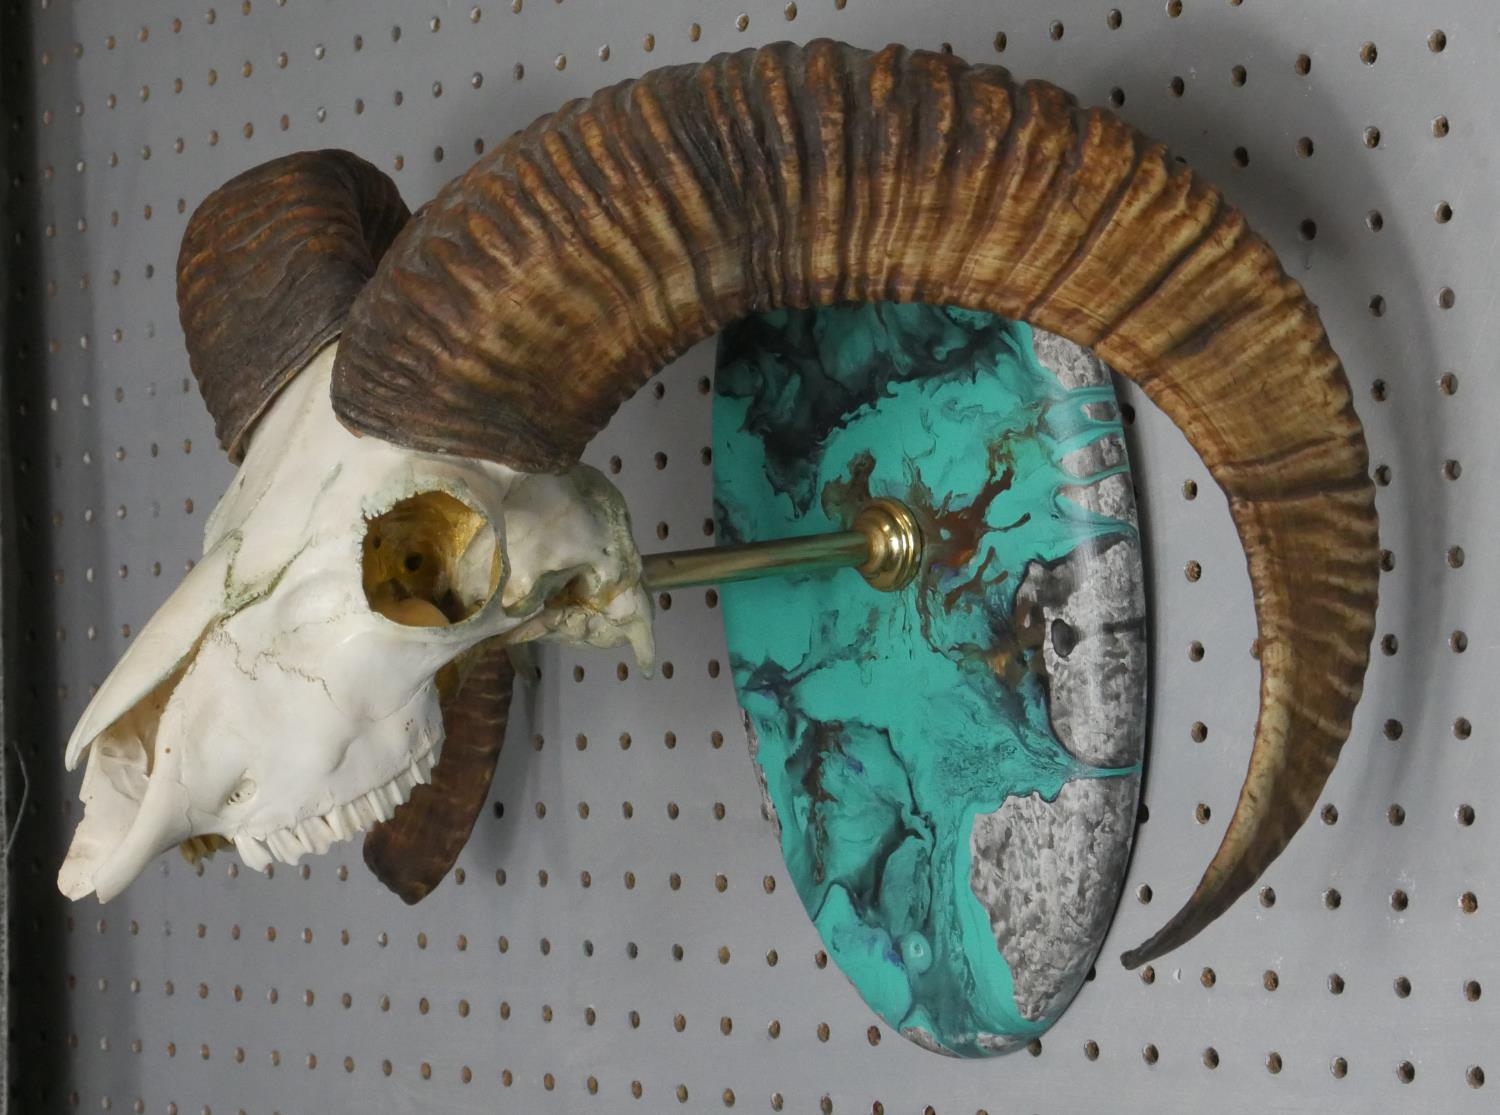 A mounted Rams skull and horns with gilded interior, mounted on a turquoise marble effect resin - Image 2 of 5